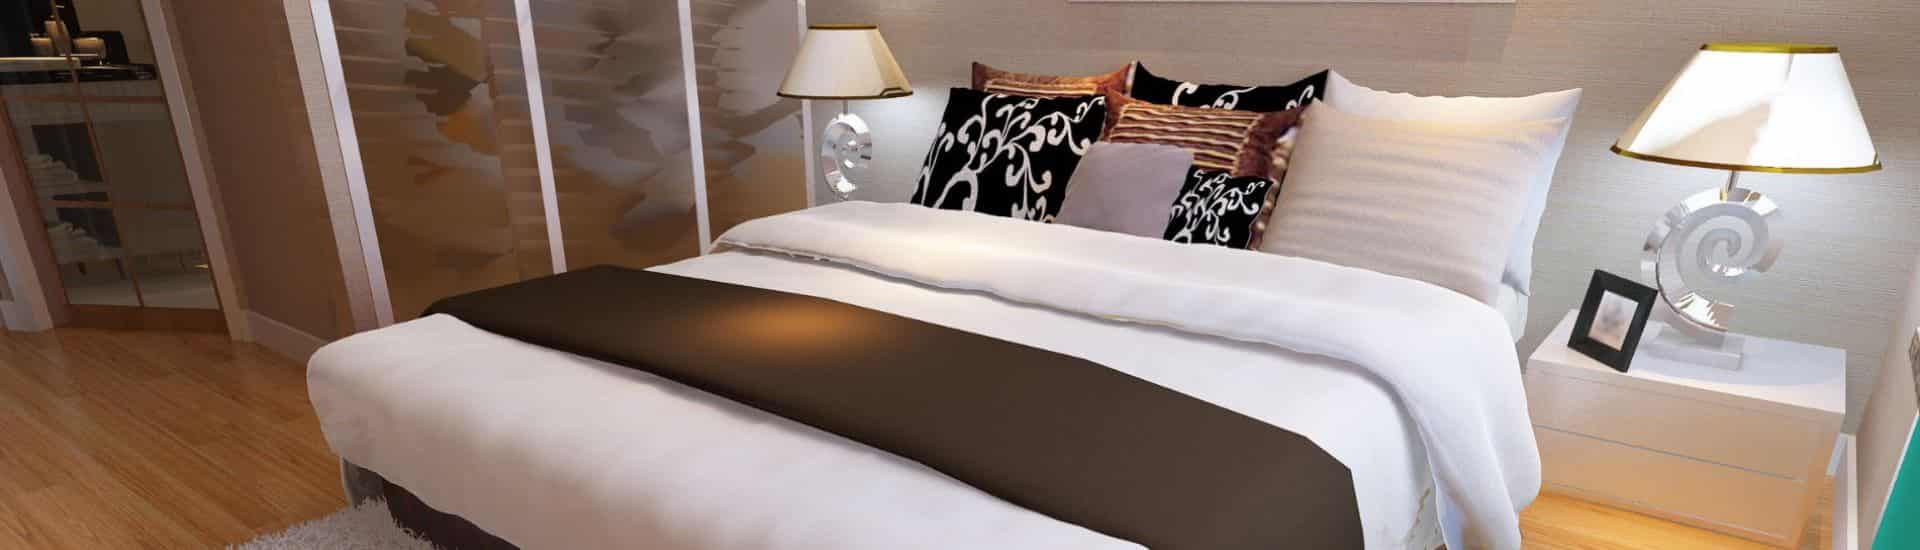 bed with white and brown linens